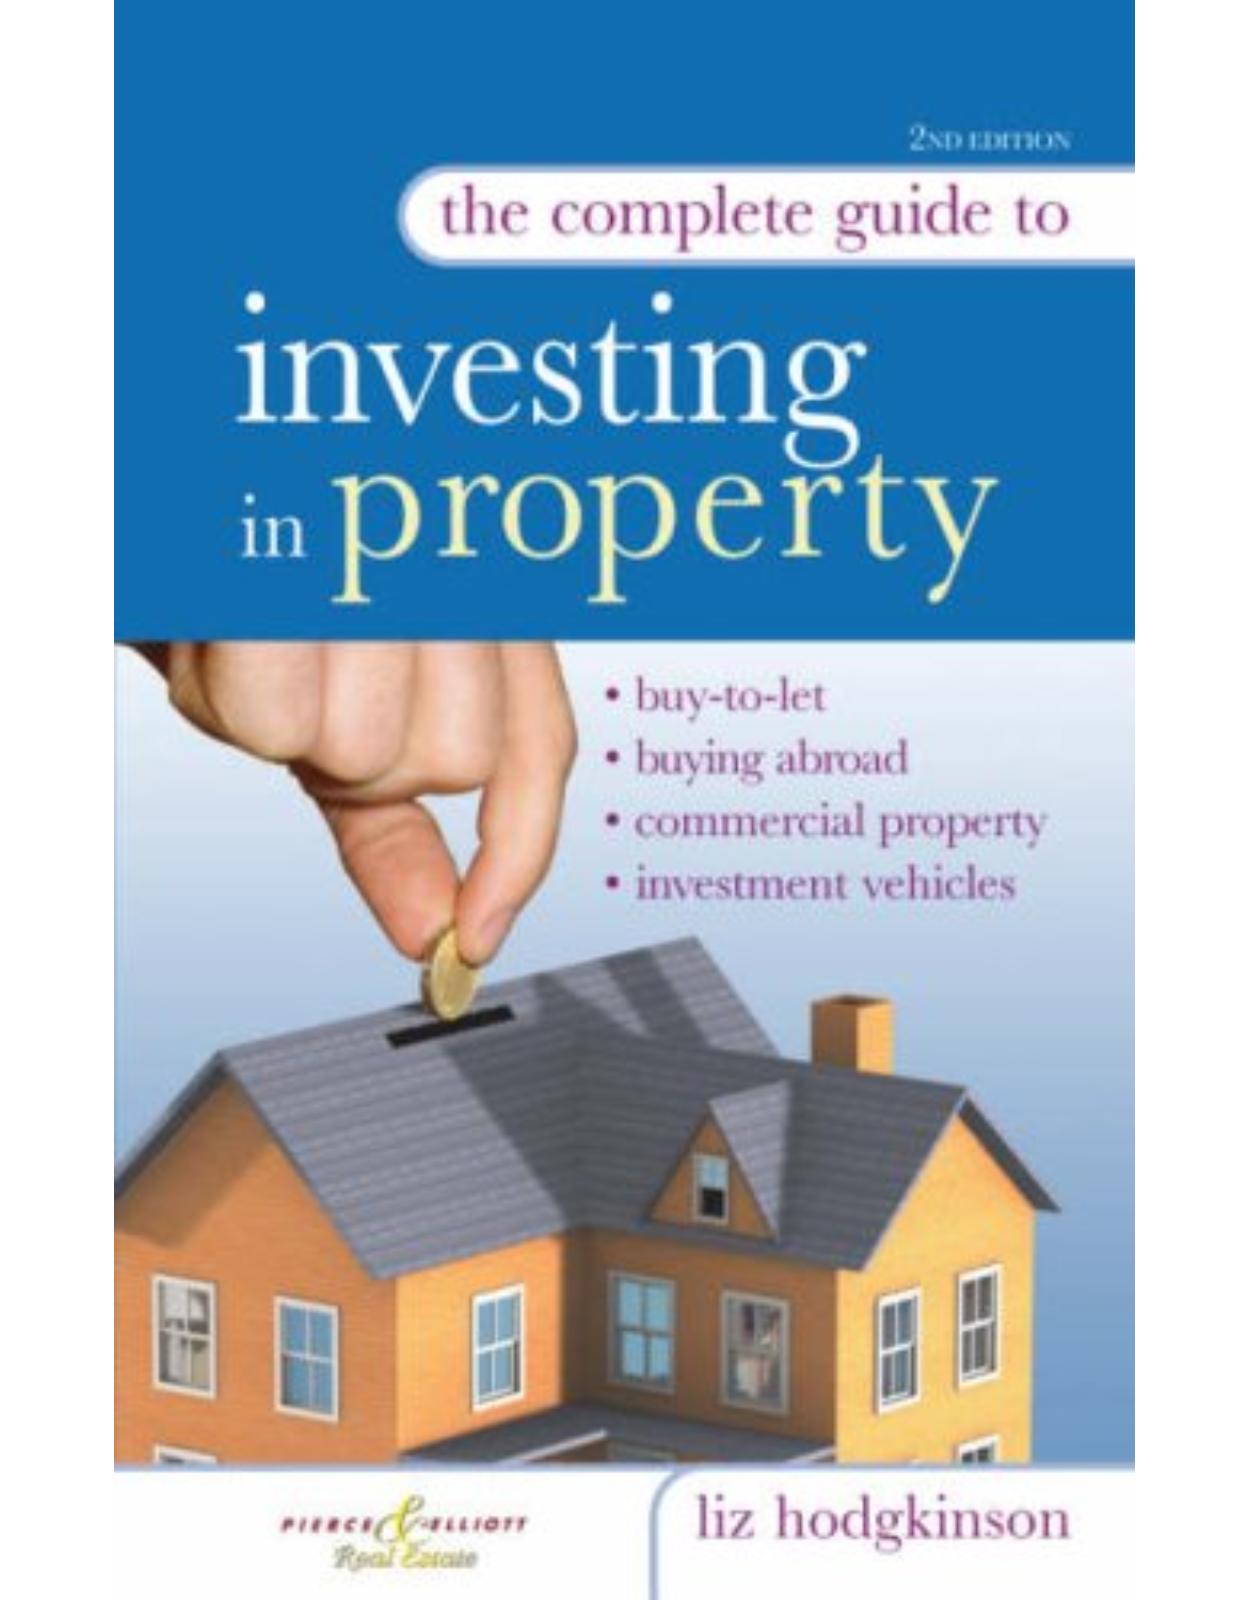 The Complete Guide to Investing in Property